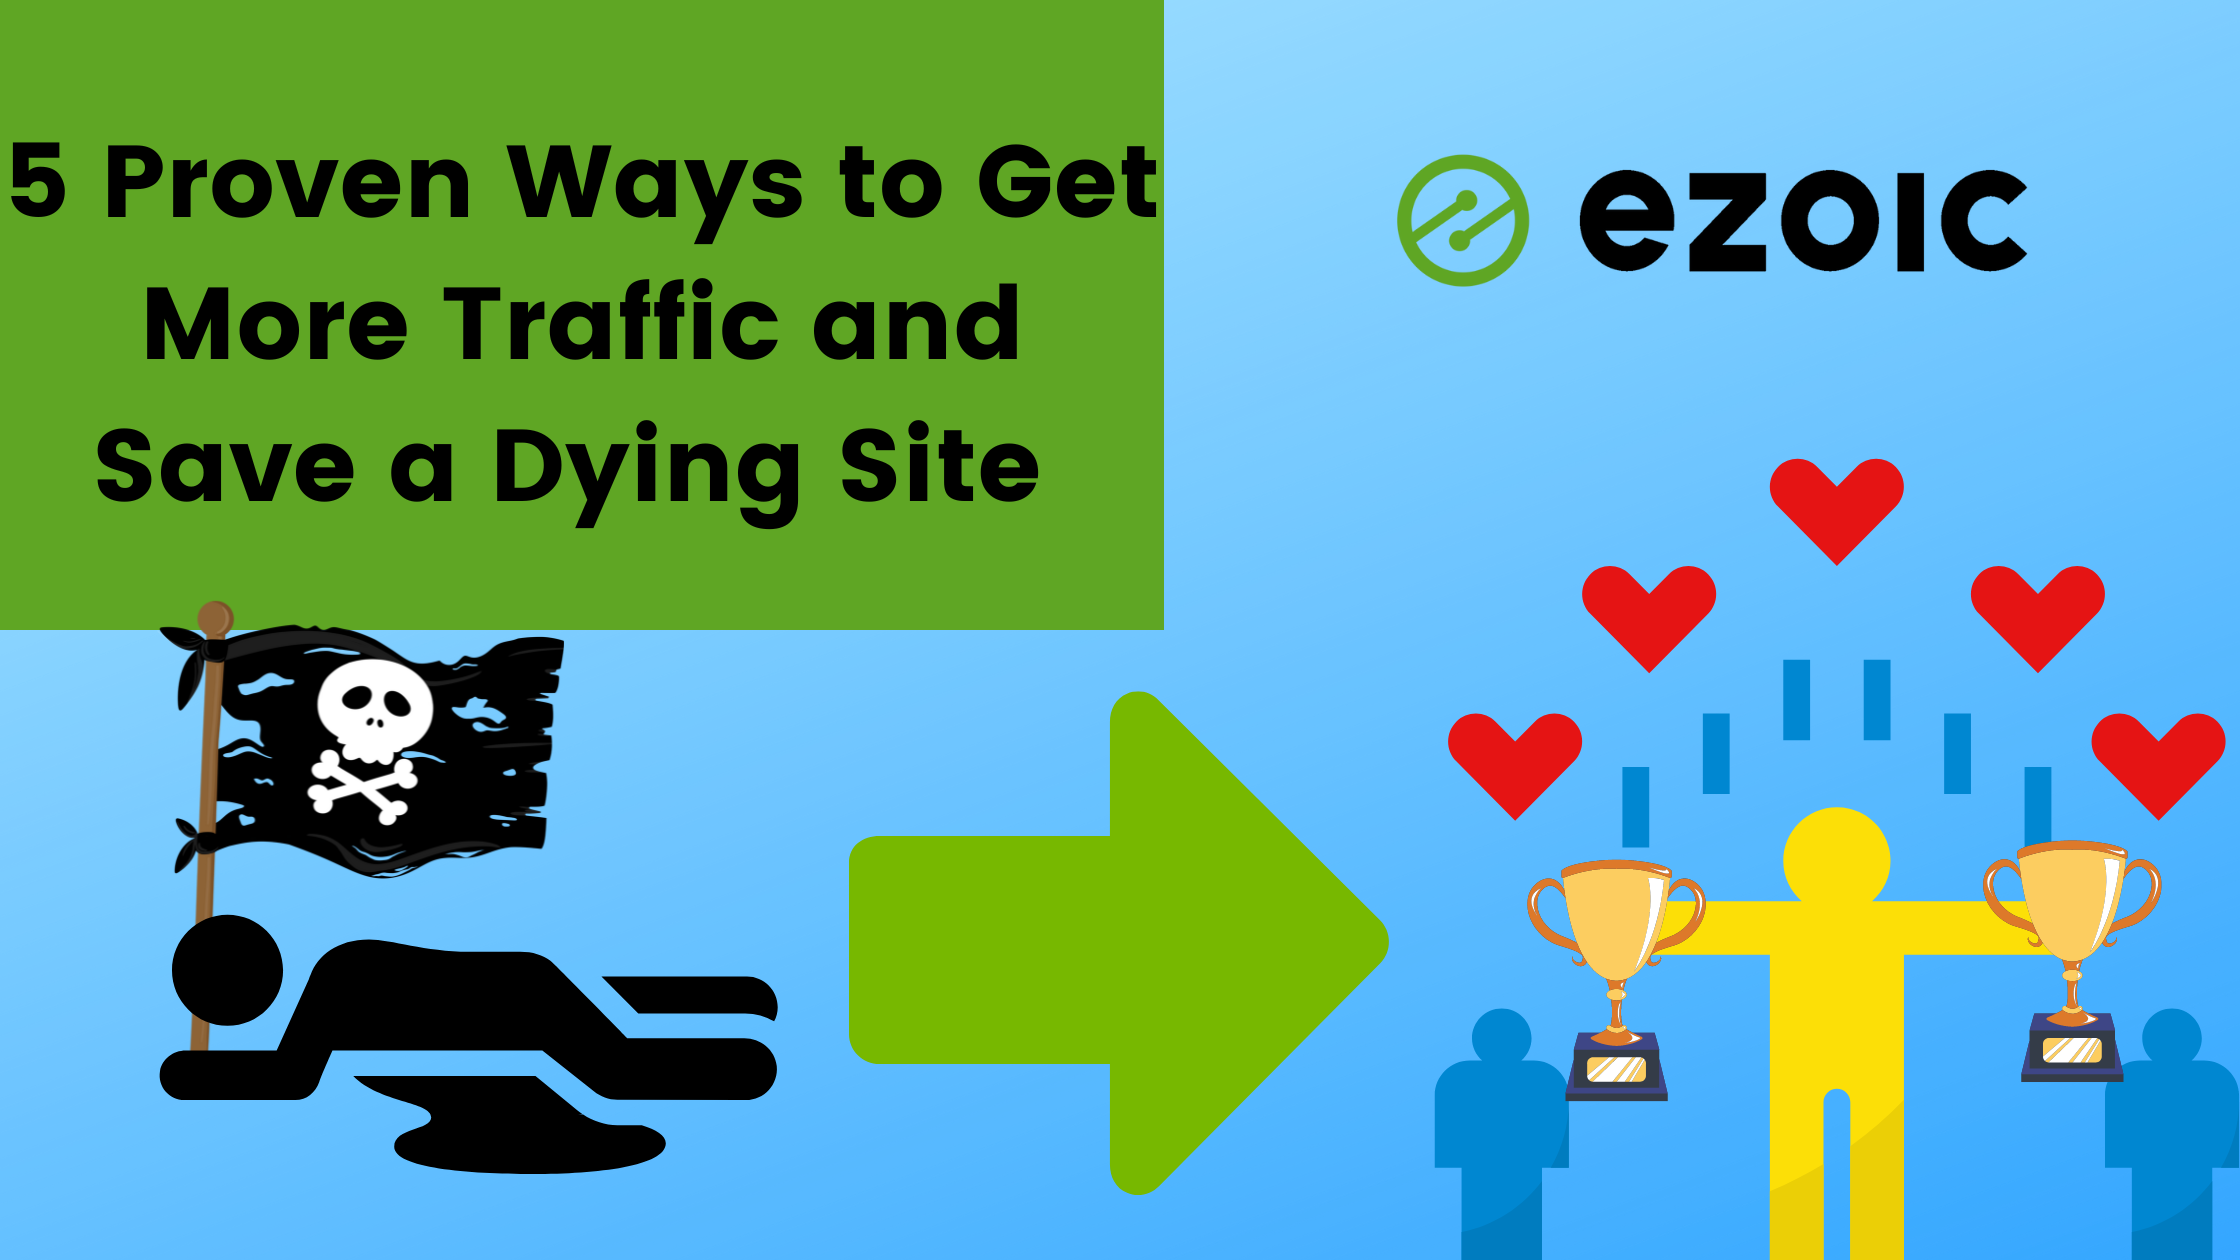 5 Proven Ways to Get More Traffic and Save a Dying Site 